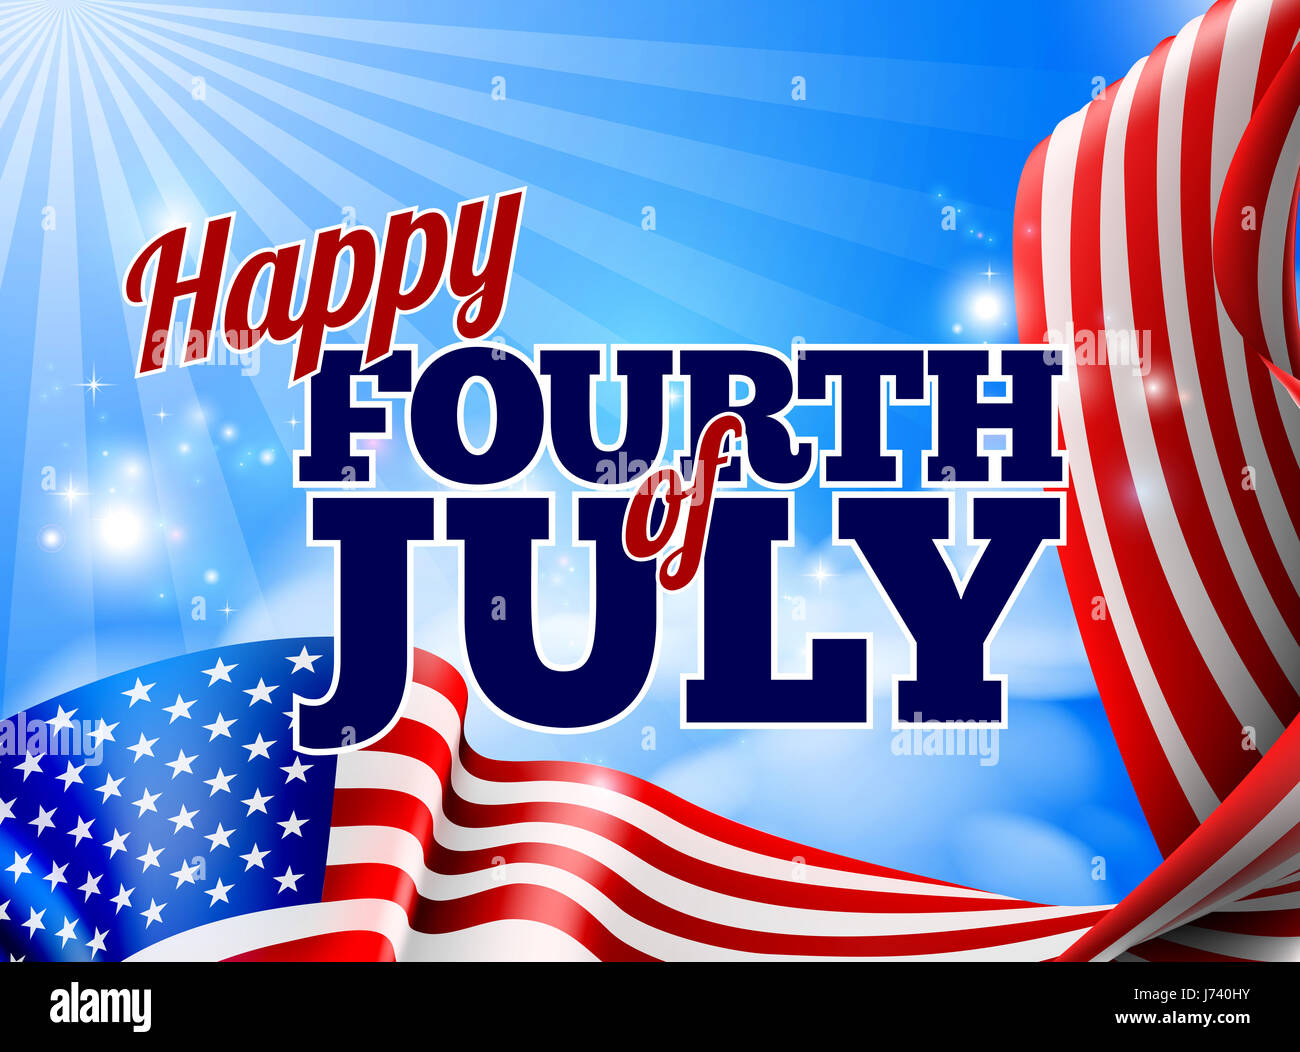 A Fourth of July Independence Day background with an American Flag design element Stock Photo